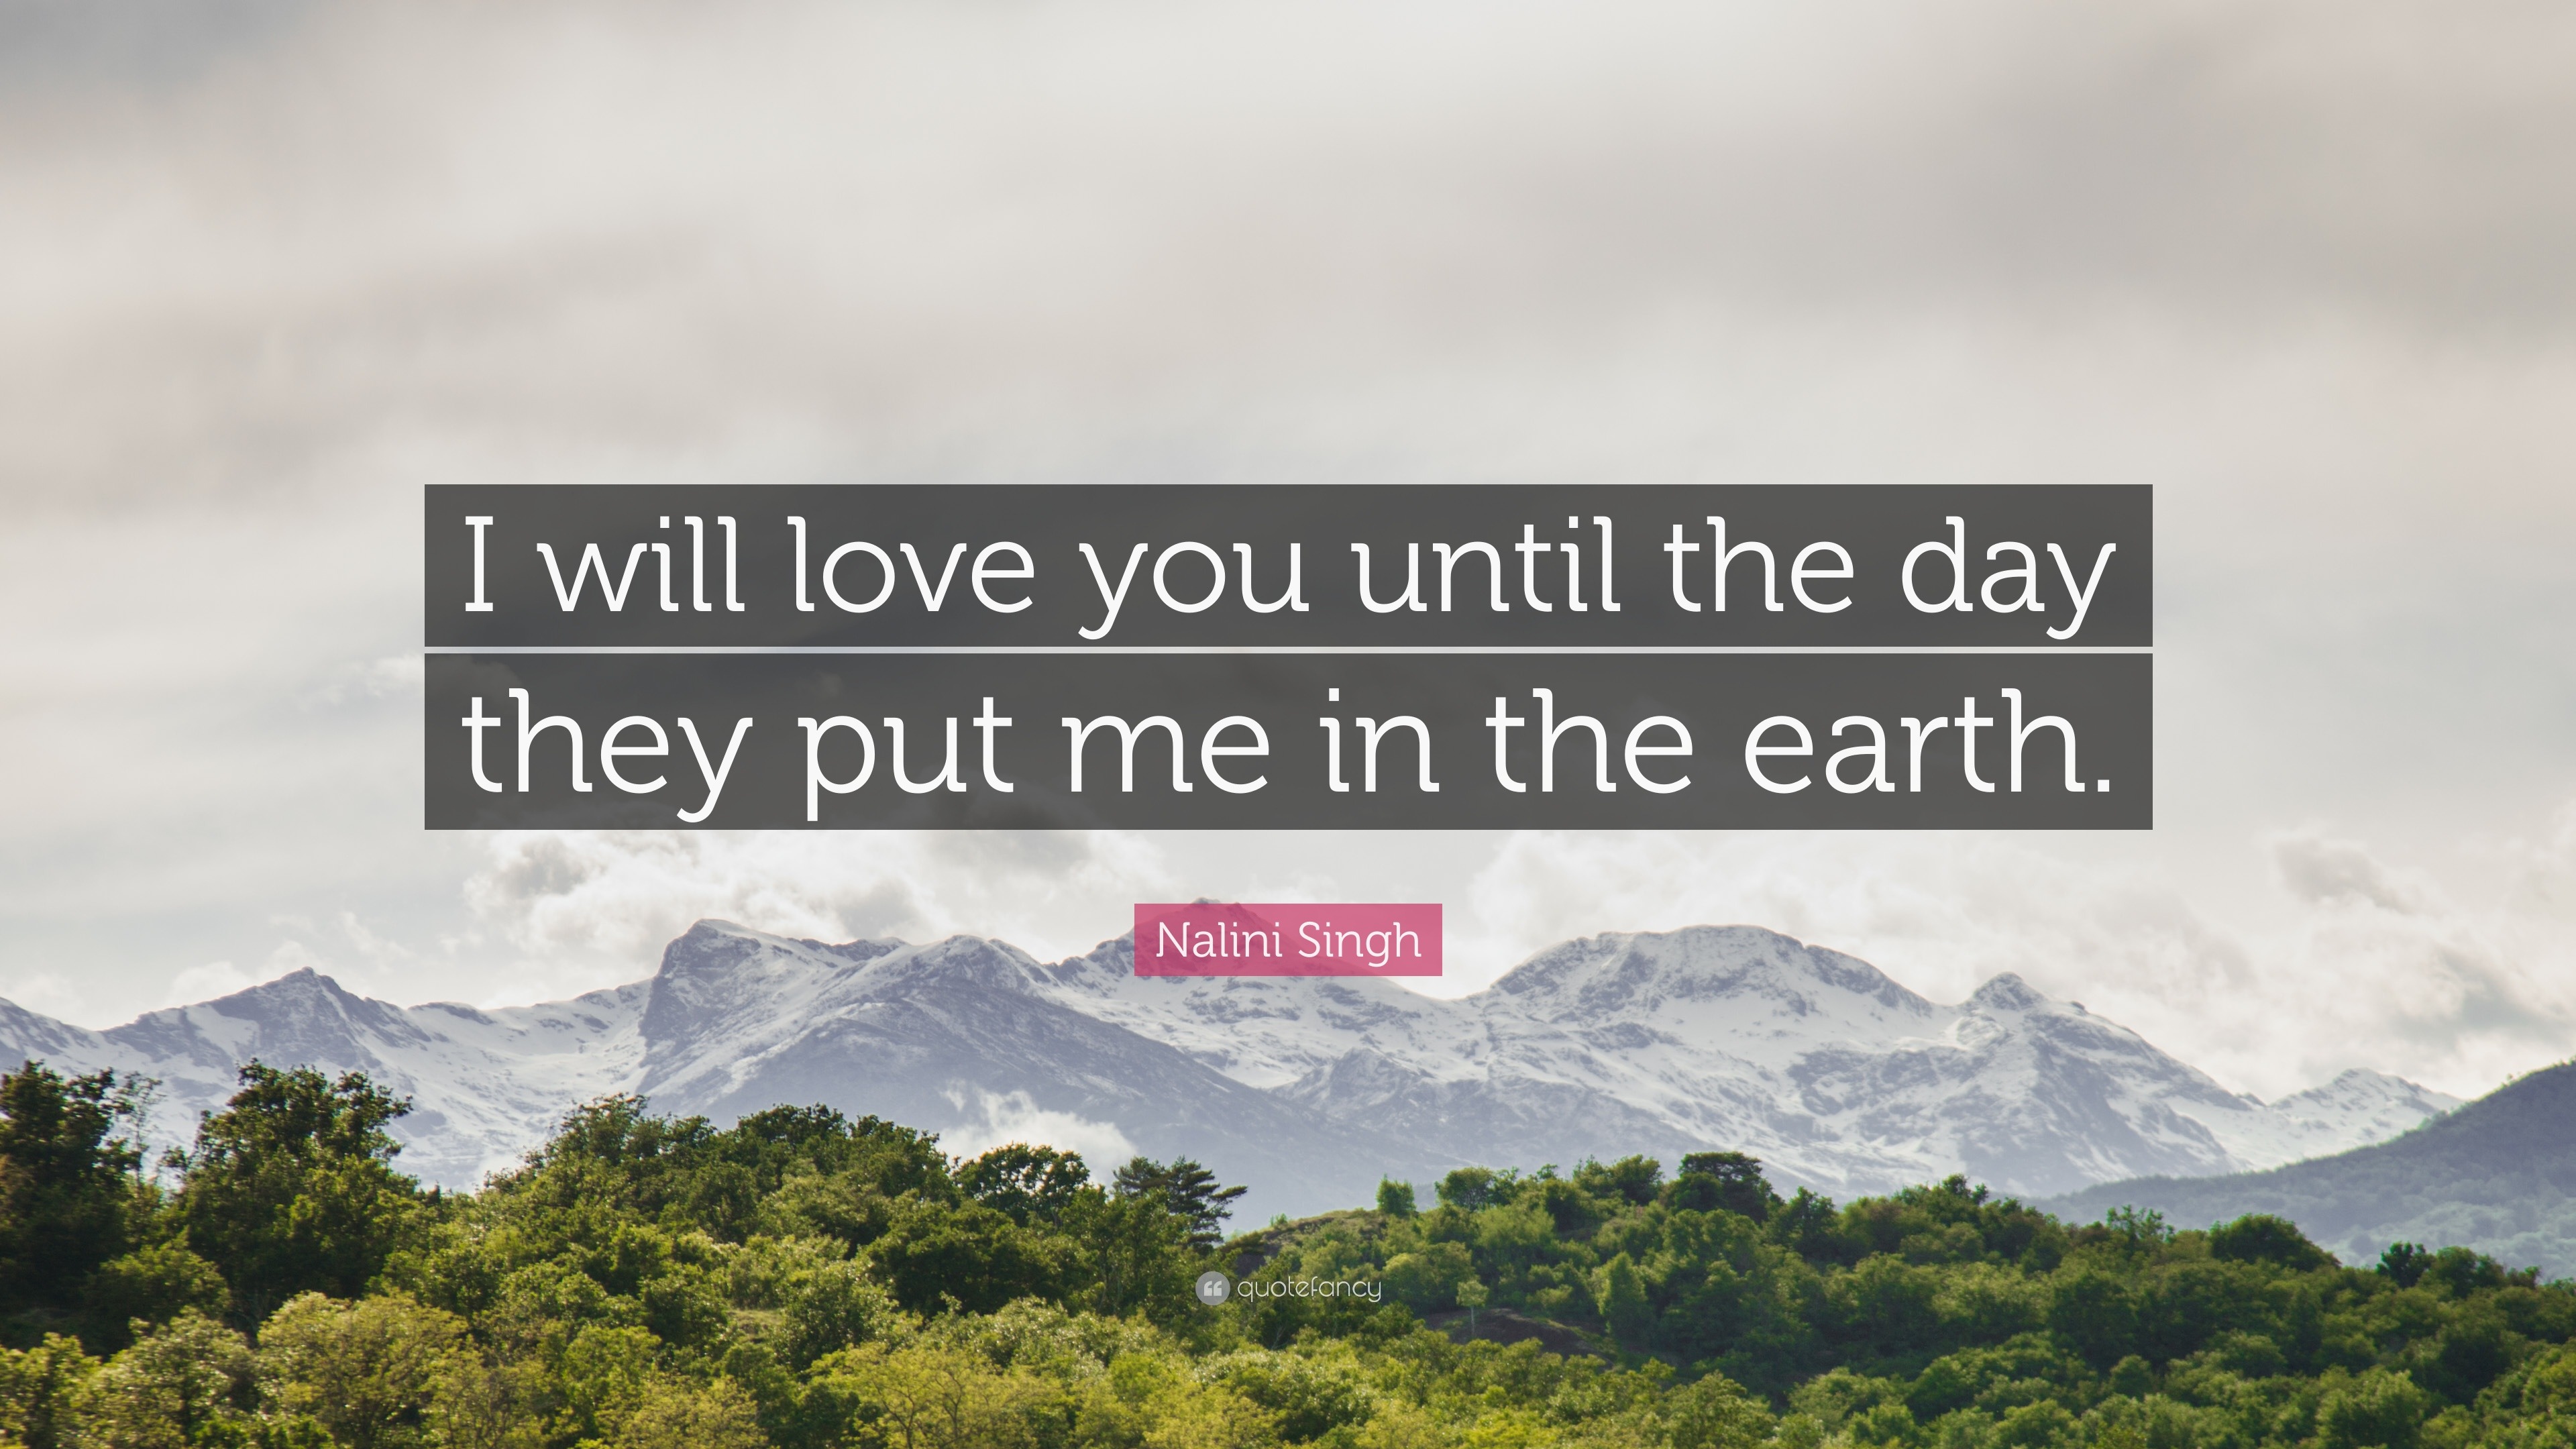 Nalini Singh Quote “I will love you until the day they put me in